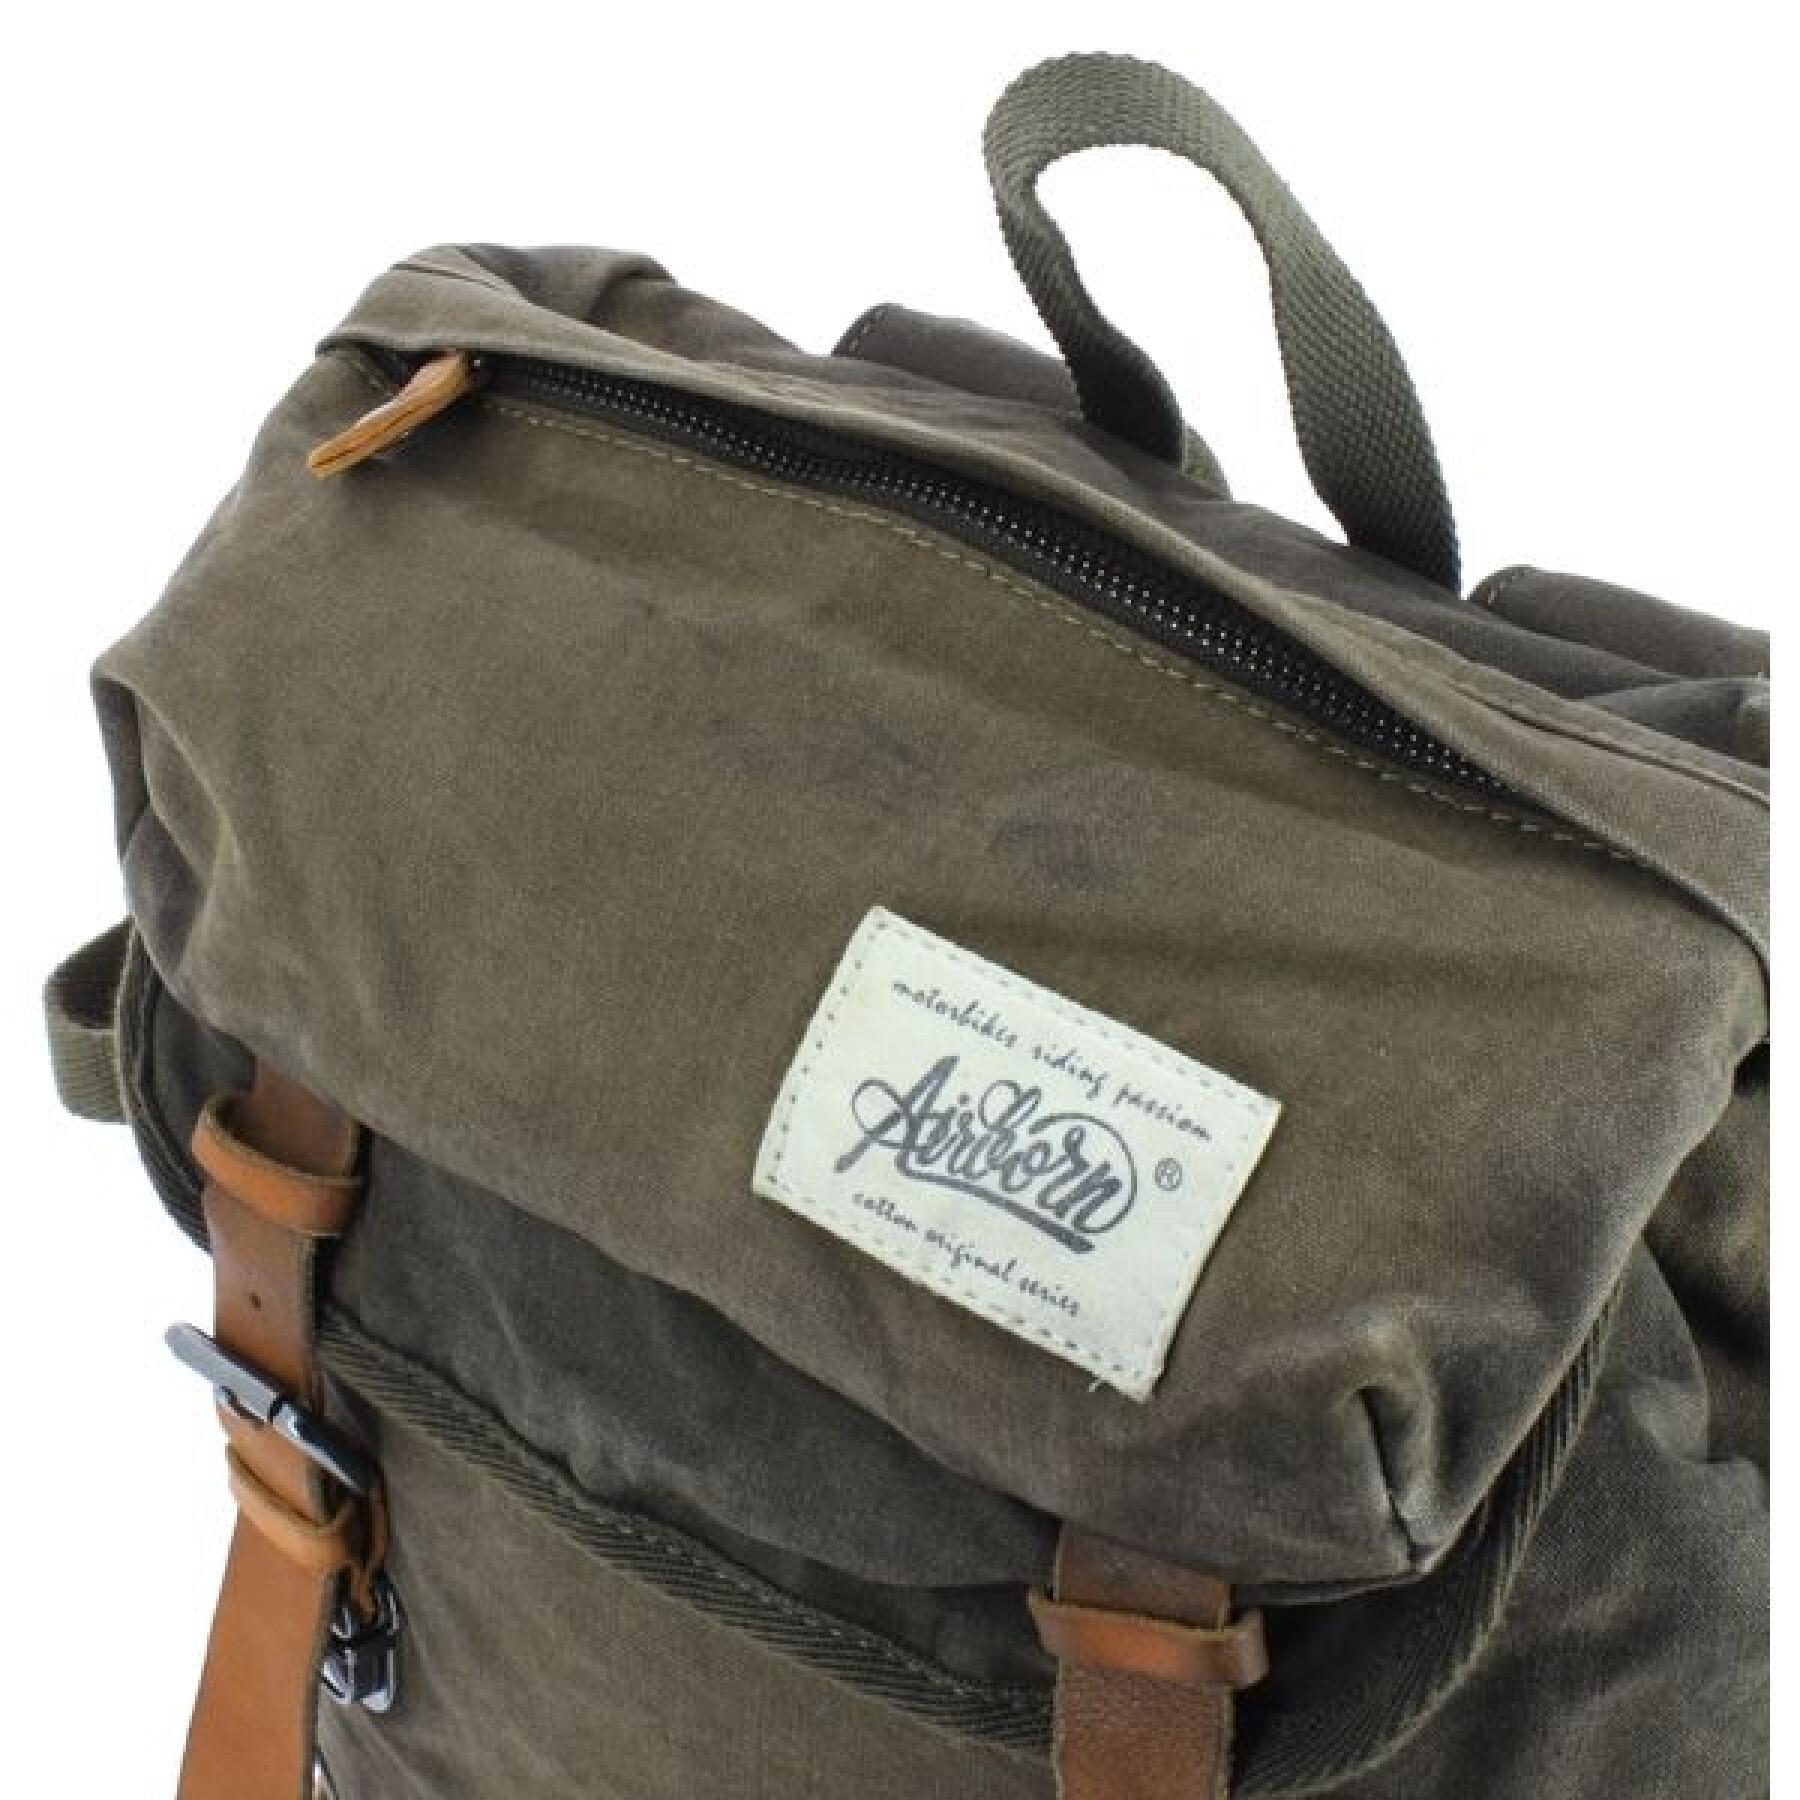 Backpack Airborn ABSD coton/cuir